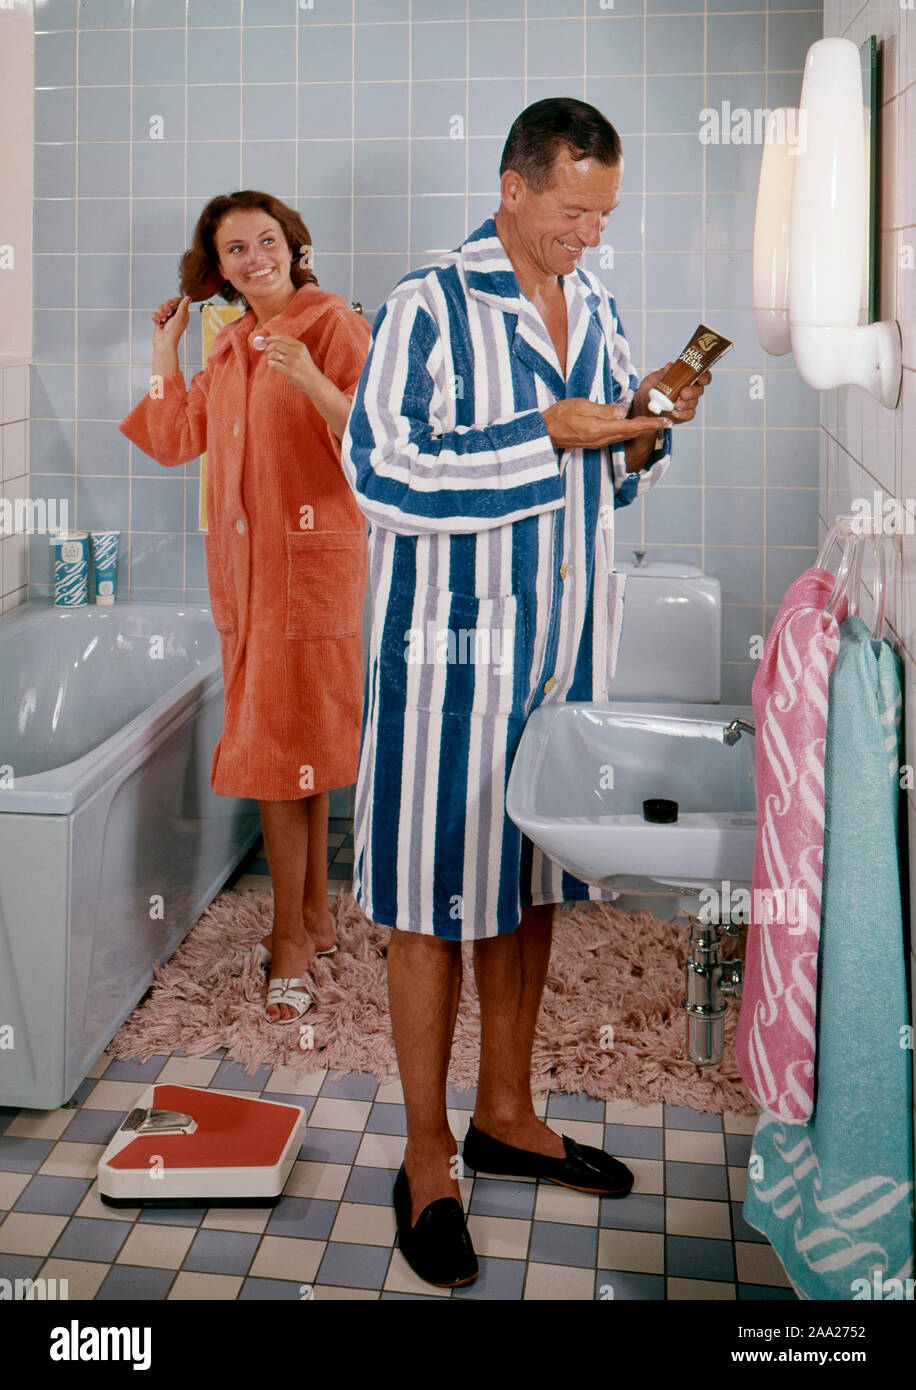 Bathroom of the 1960s. A couple in their typical 1960s bathroom. She in a orange  bathrobe brushing her hair Stock Photo - Alamy